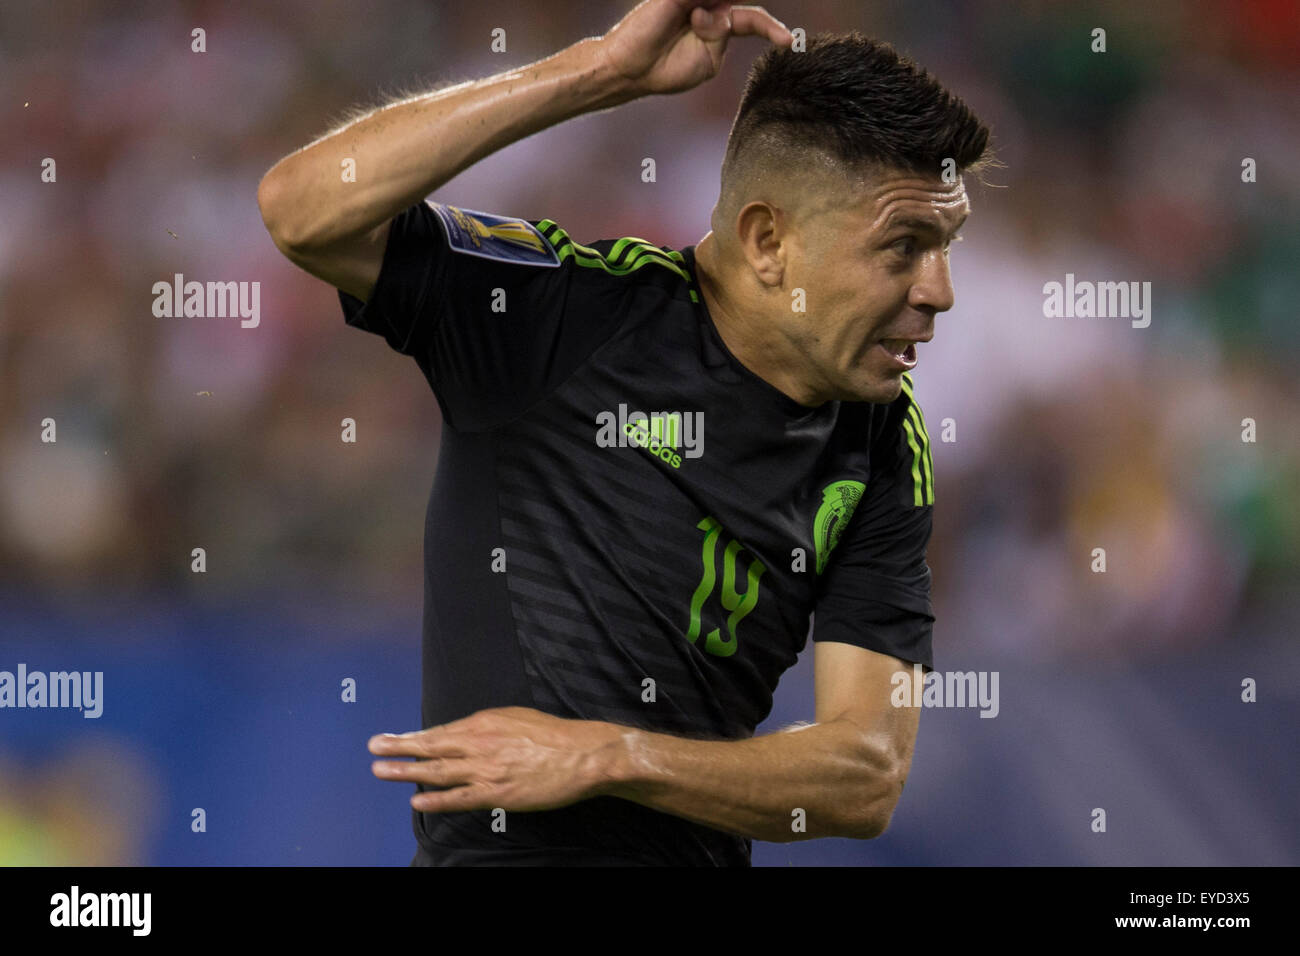 July 26, 2015: Mexico forward Oribe Peralta (19) in action during the CONCACAF Gold Cup 2015 Final match between Jamaica and Mexico at Lincoln Financial Field in Philadelphia, Pennsylvania. Mexico won 3-1. Christopher Szagola/CSM Stock Photo